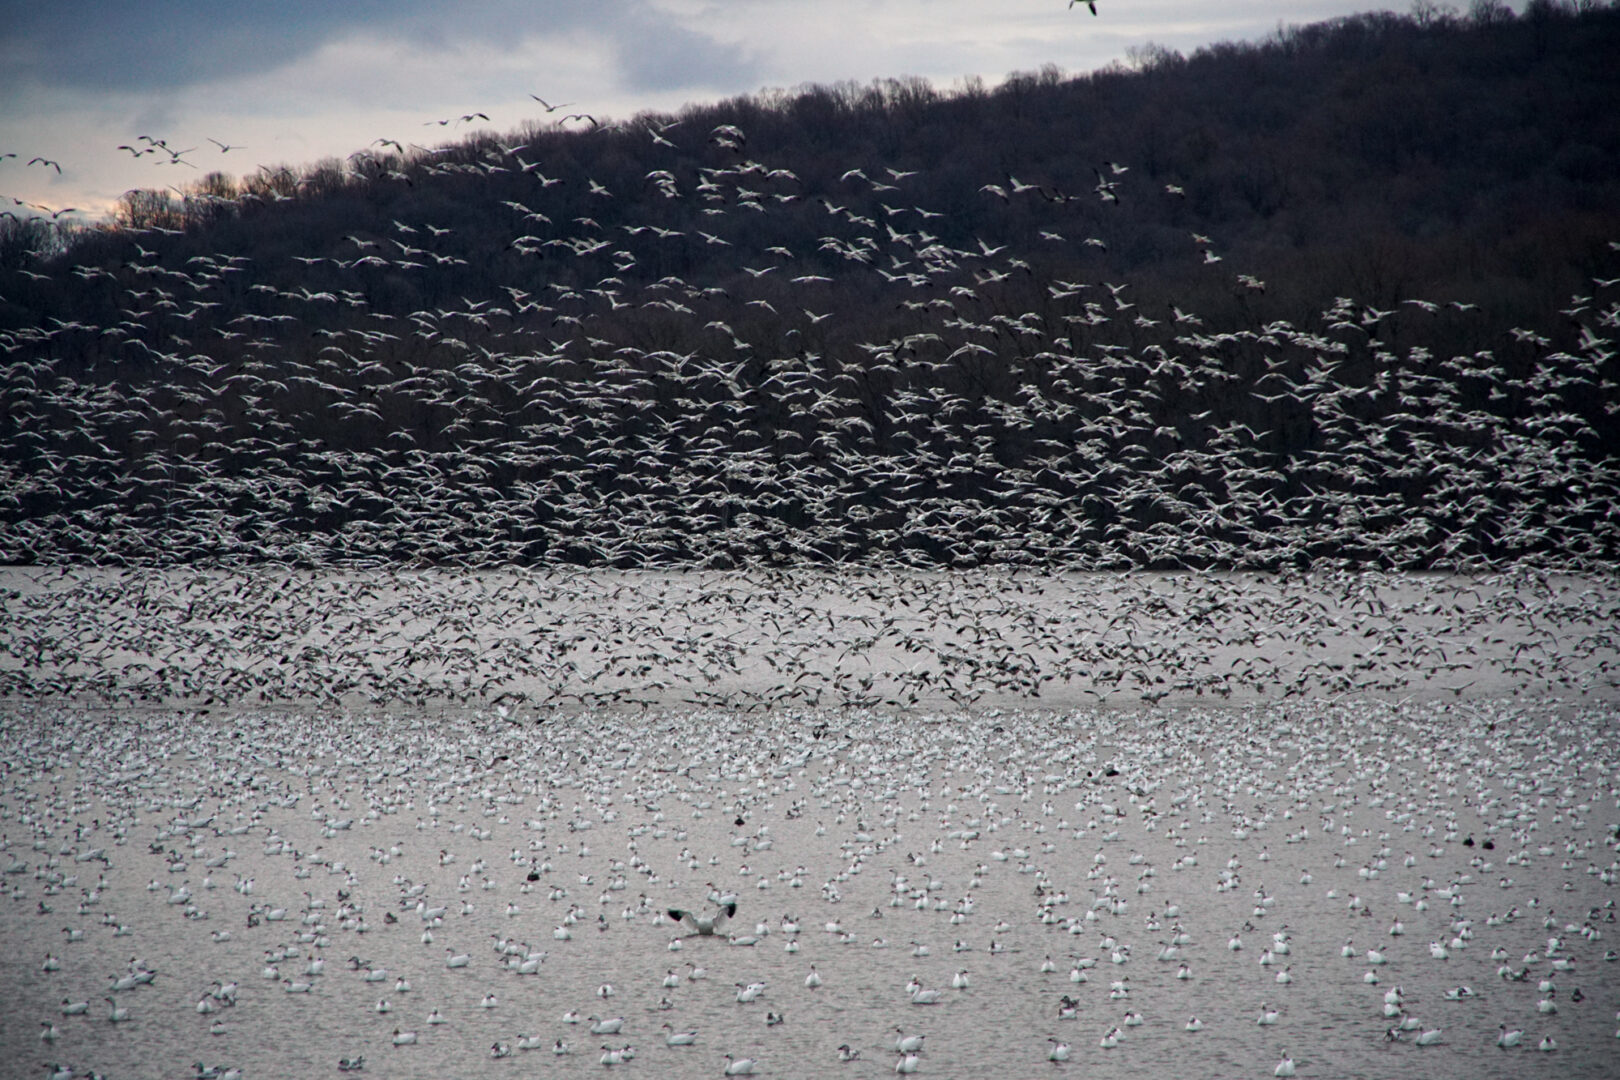 Tens of thousands of migrating snow geese stop over at Middle Creek Wildlife Management Area every year. This photo is from March 3, 2022.